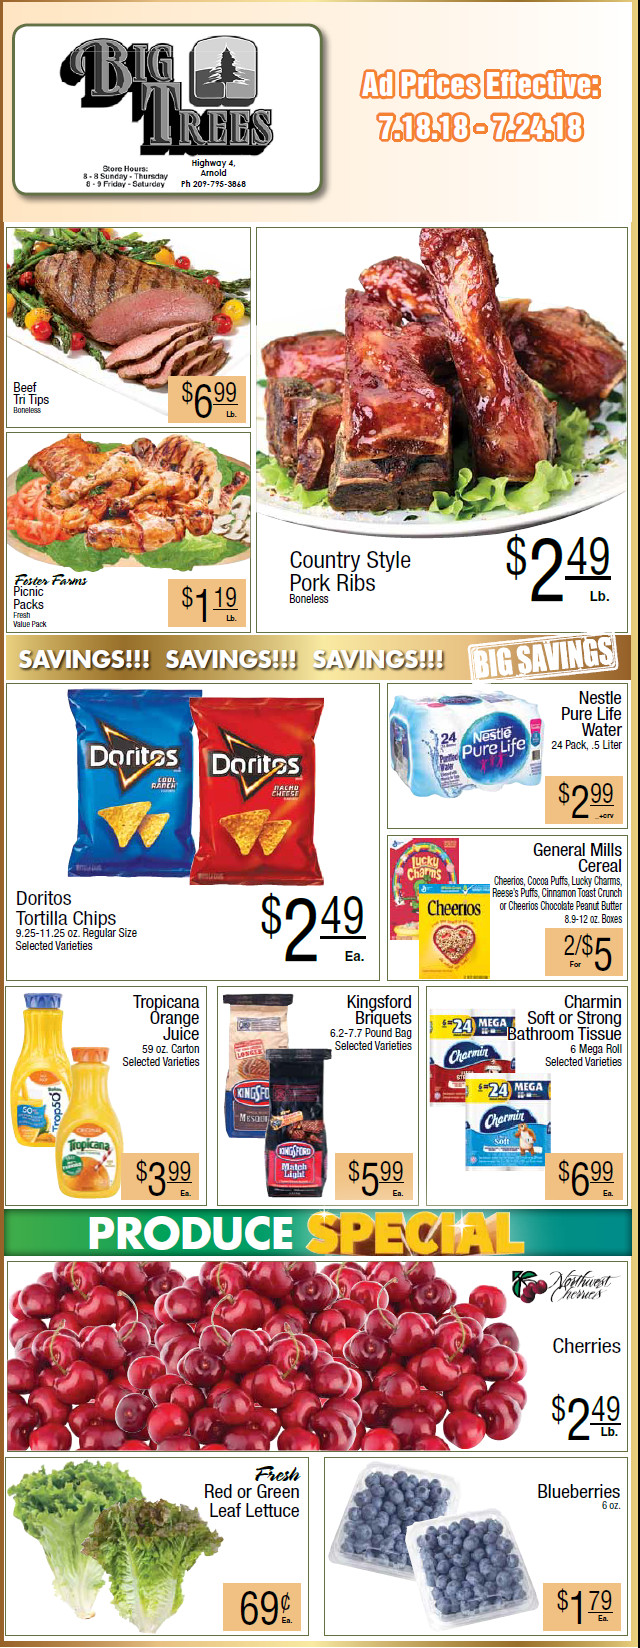 Big Trees Market Weekly Ad & Specials Through July 24th